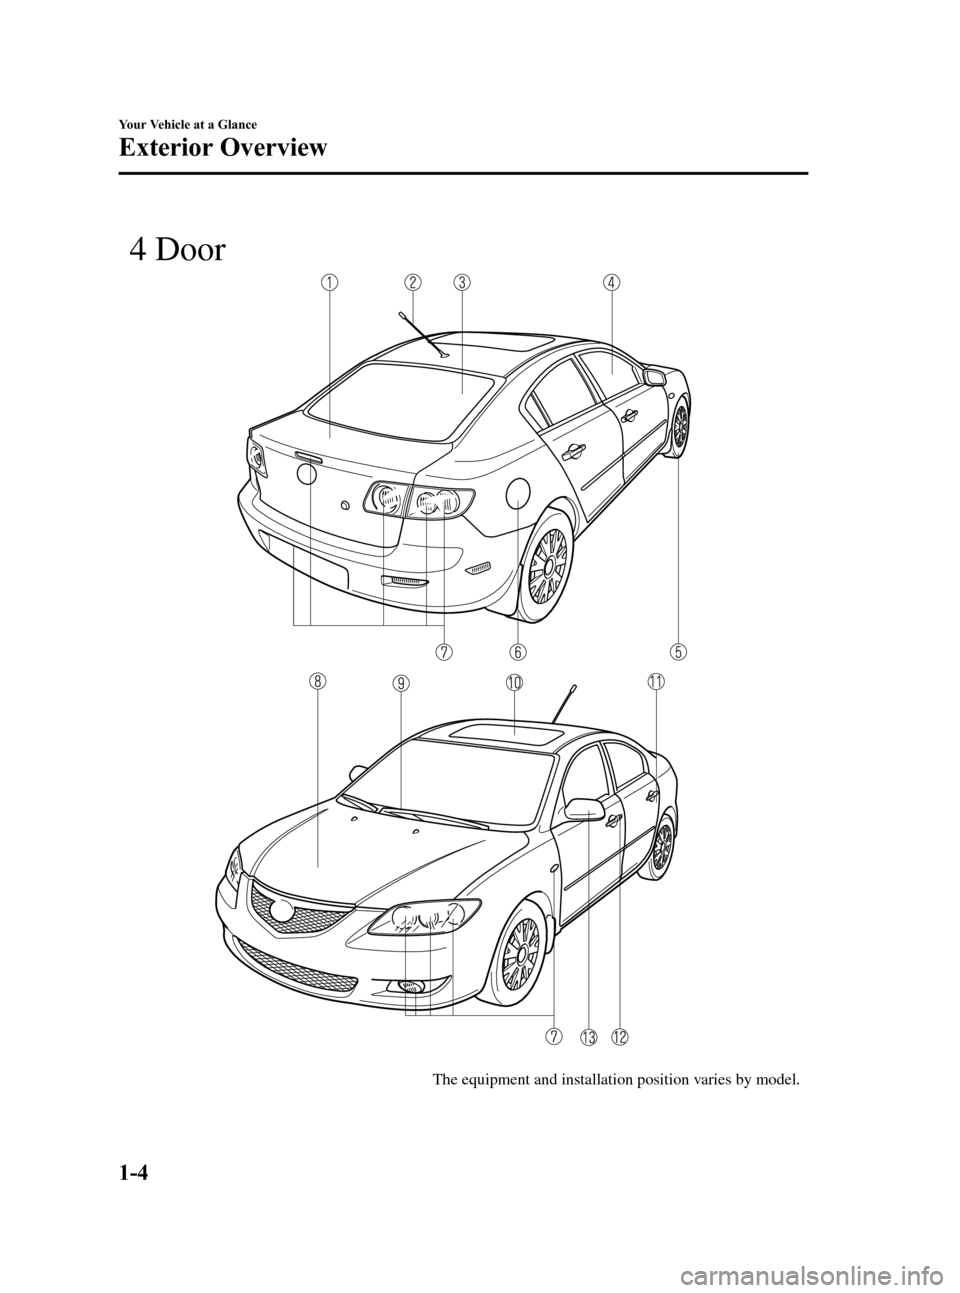 MAZDA MODEL 3 HATCHBACK 2006  Owners Manual (in English) Black plate (10,1)
The equipment and installation position varies by model.
 4 Door
1-4
Your Vehicle at a Glance
Exterior Overview
Mazda3_8U55-EA-05G_Edition2 Page10
Thursday, June 23 2005 2:52 PM
For